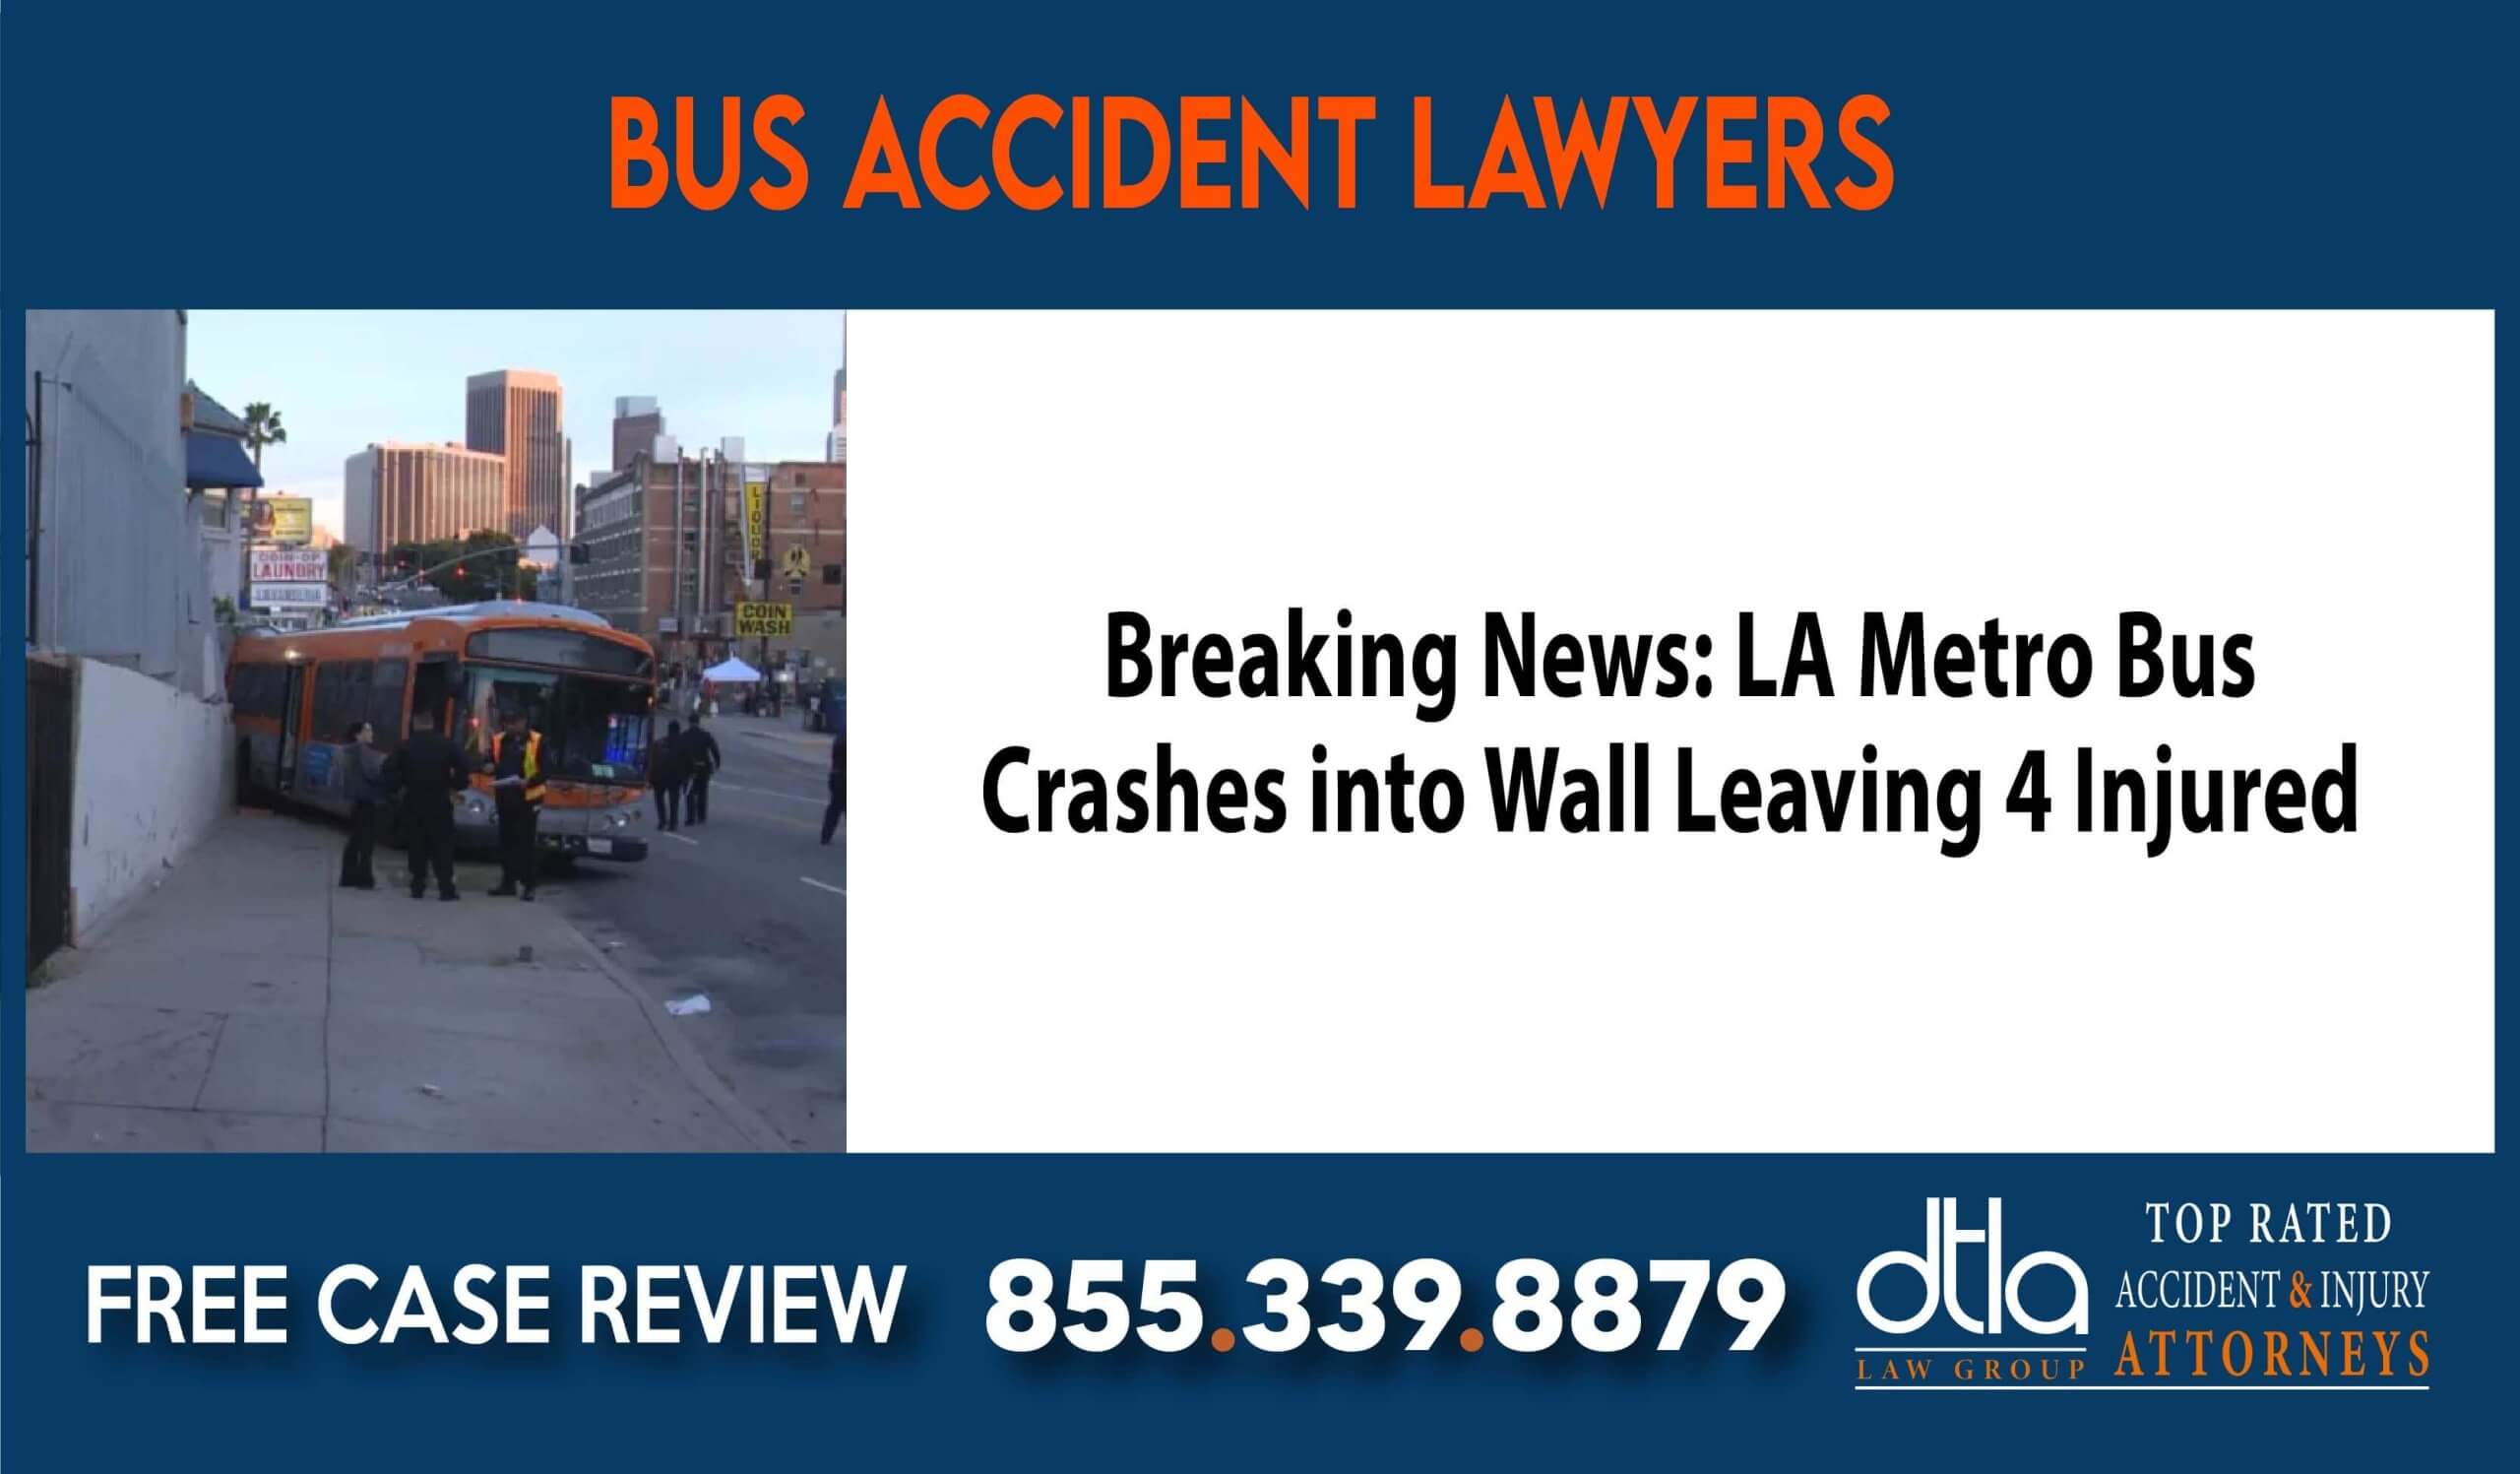 Breaking News LA Metro Bus Crashes into Wall Leaving 4 Injured Bus Accident Lawyers lawsuit liability compensation lawyer attorney sue